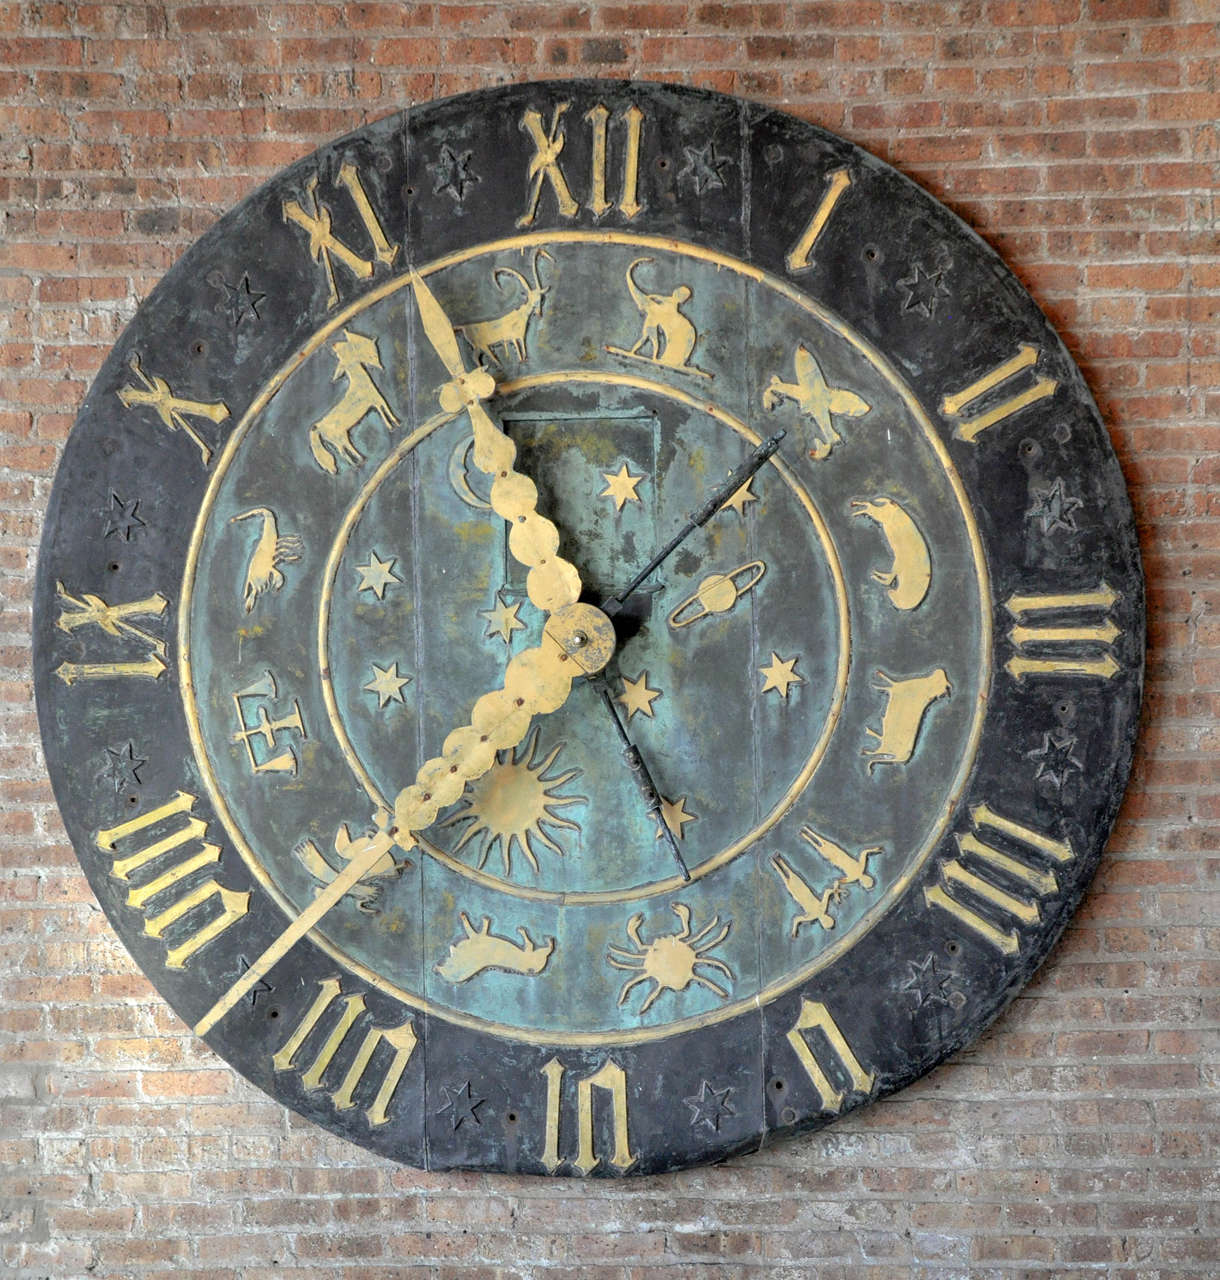 American zinc over wood clock face with Roman numerals and zodiac signs from the Schlitz Brewery clock tower in Milwaukee, Wisconsin.